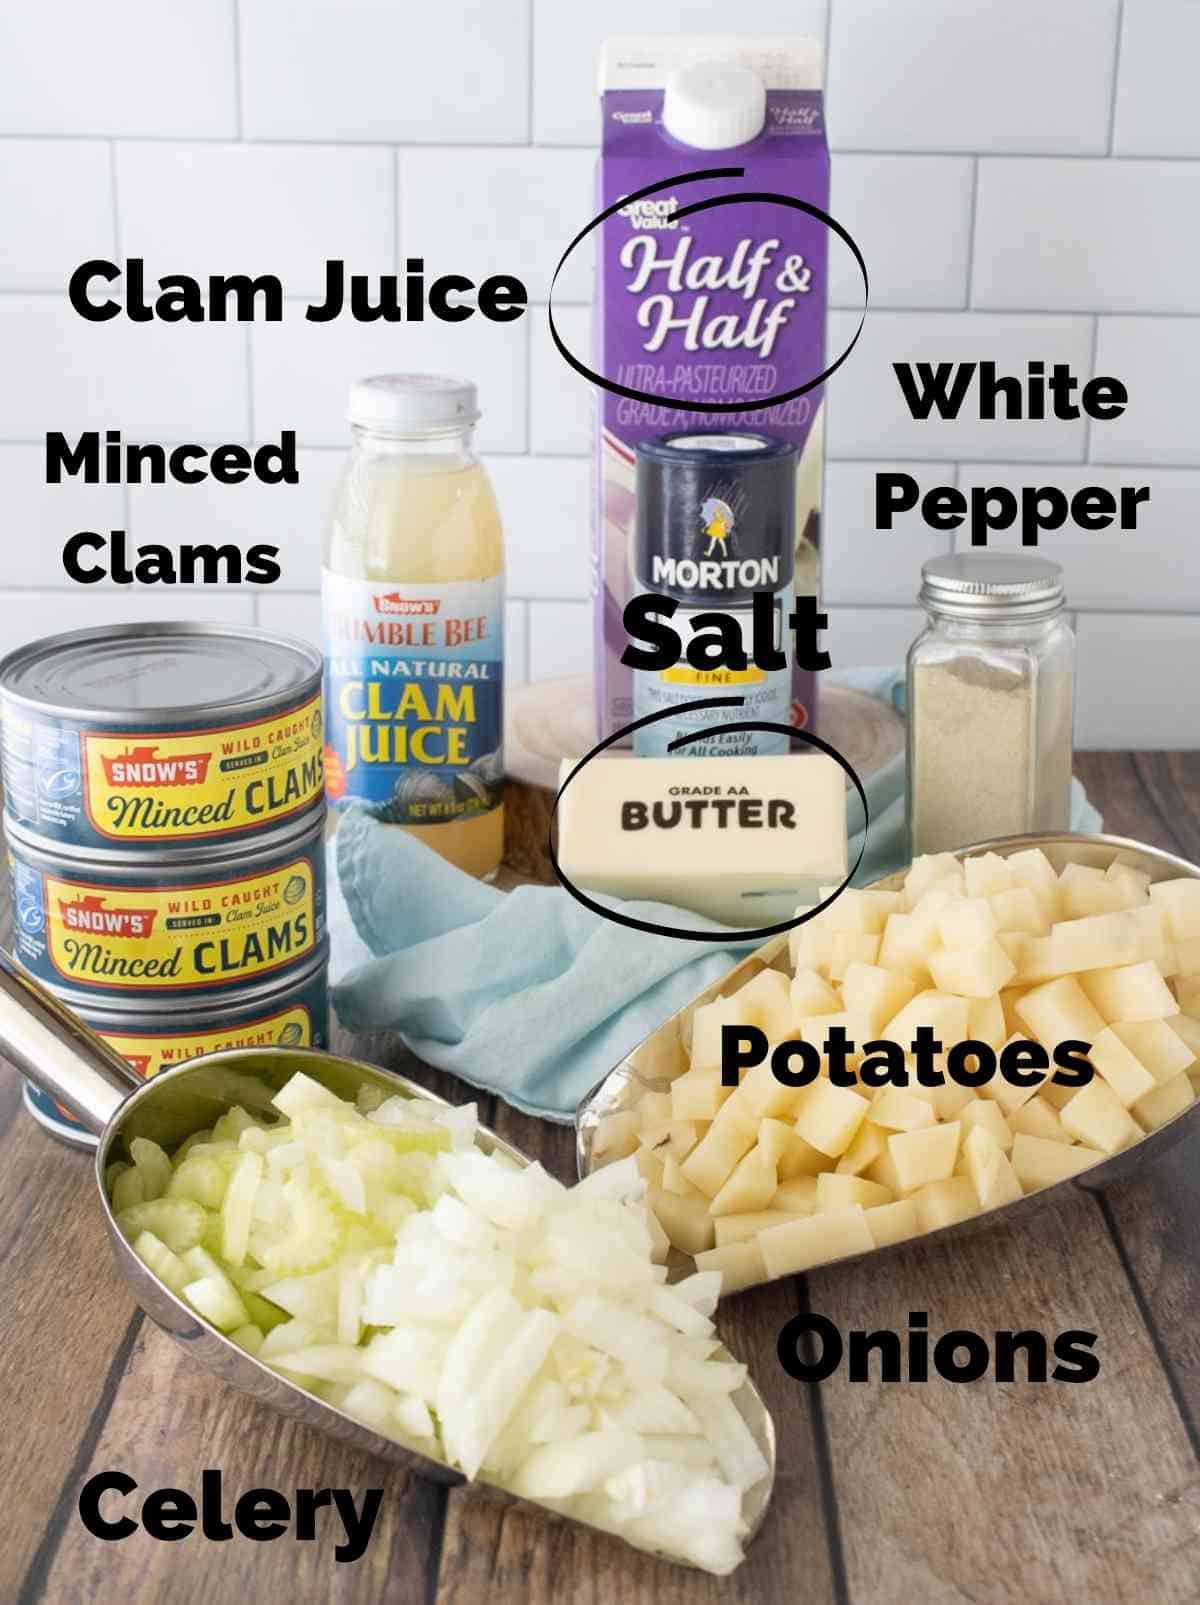 Ingredients for clam chowder